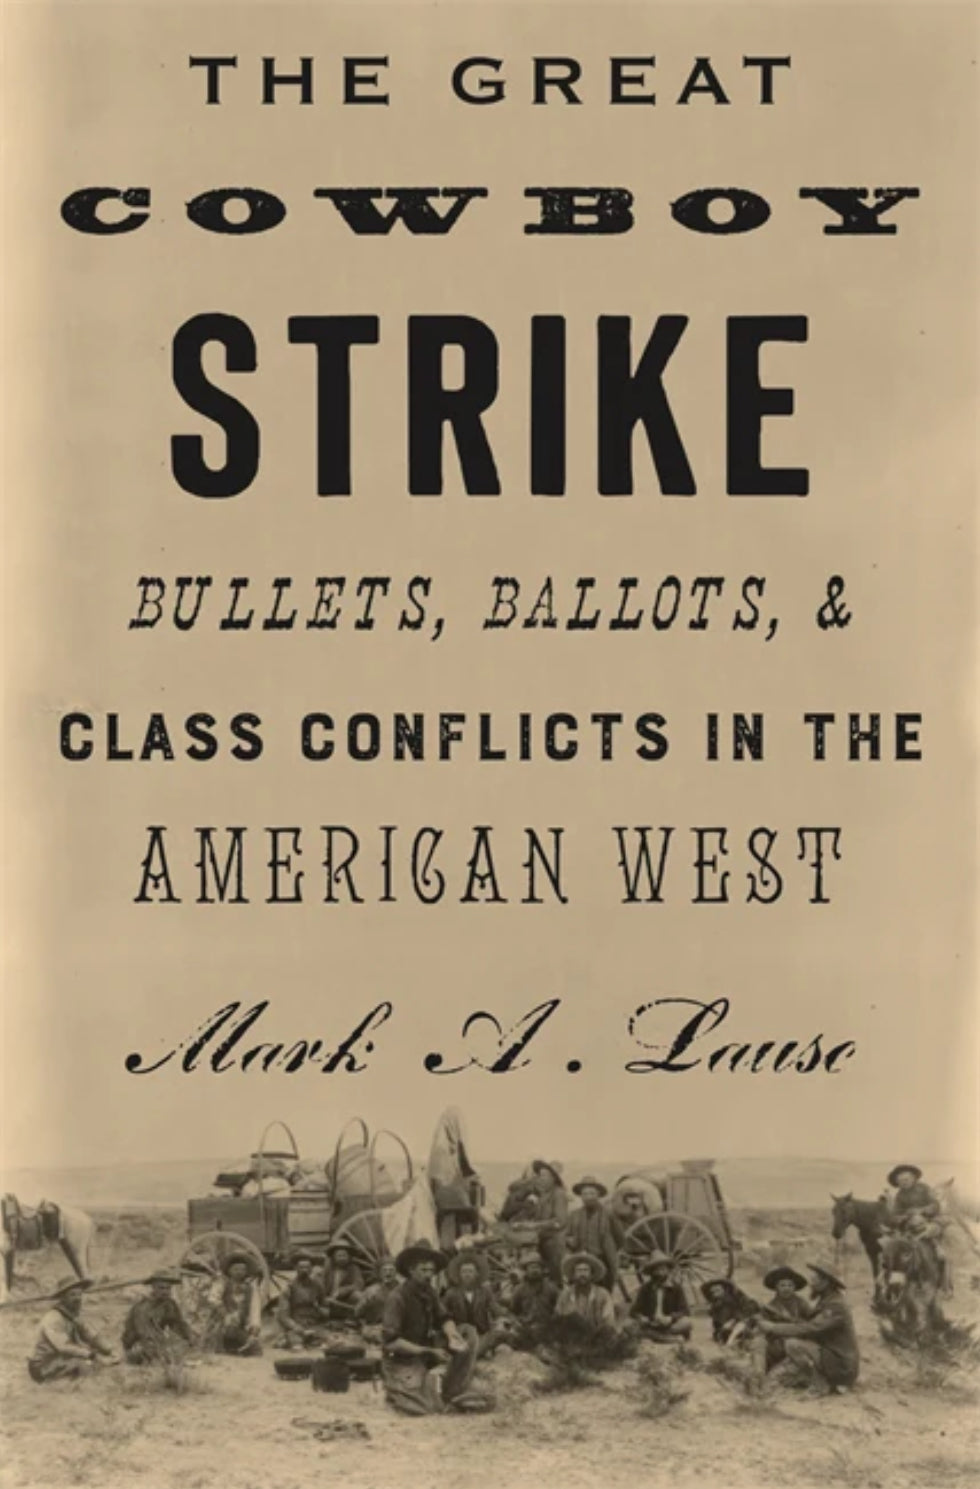 The Great Cowboy Strike: Bullets, Ballots & Class Conflicts in the American West